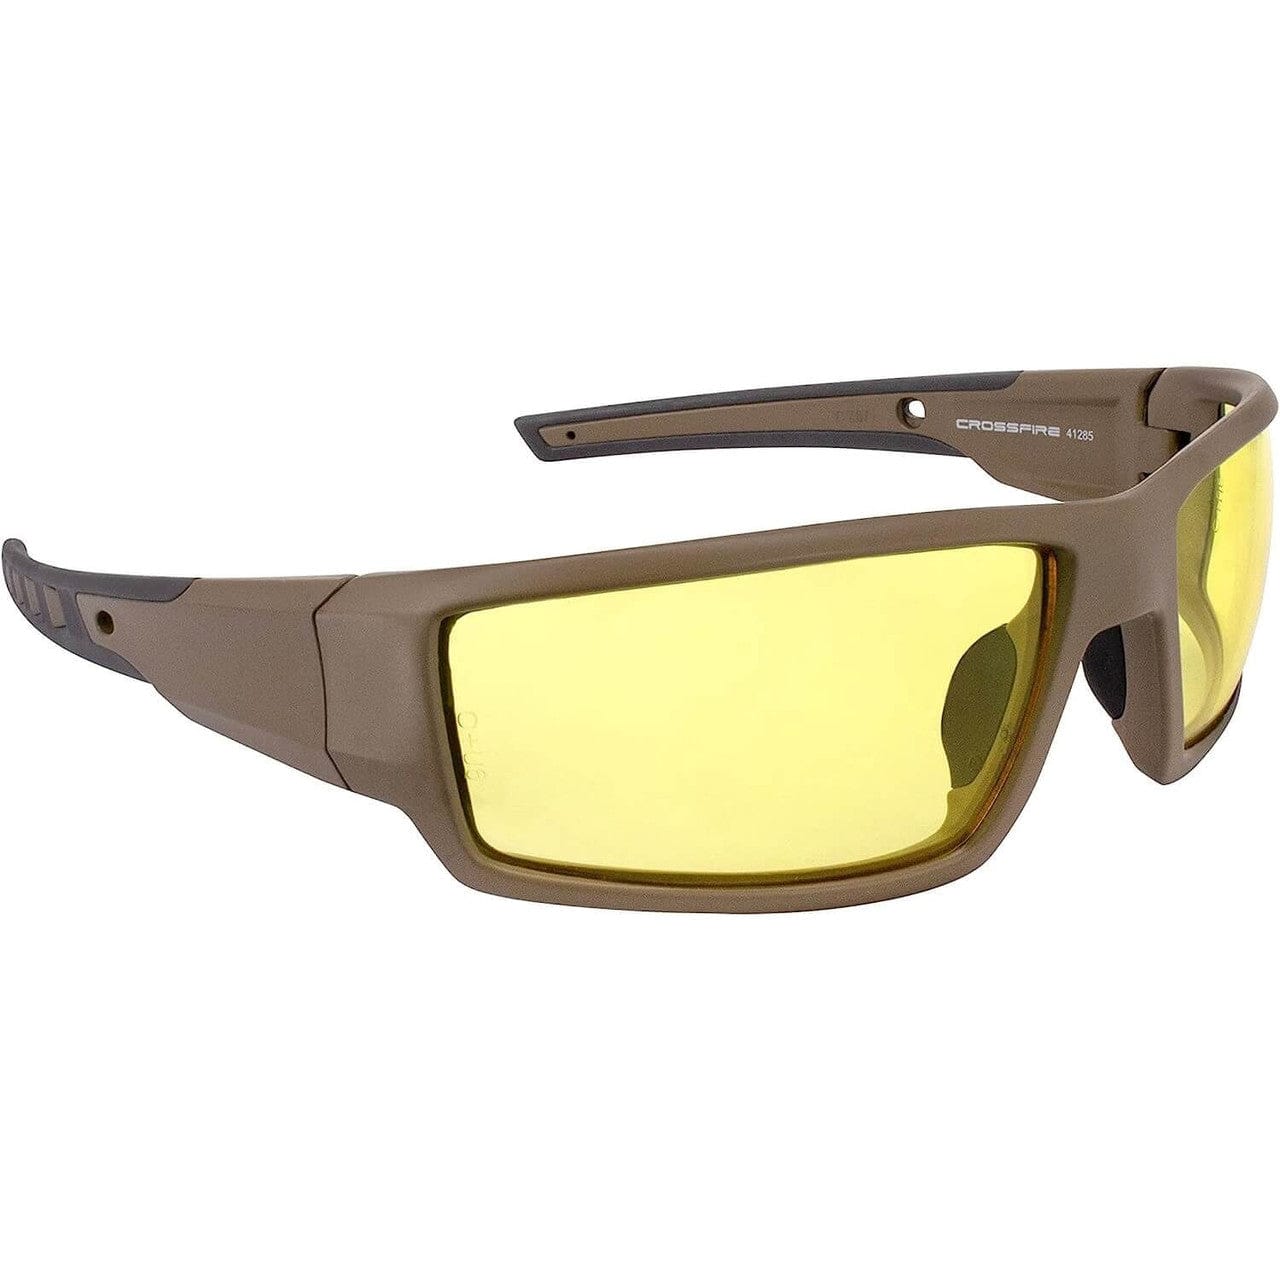 Crossfire Cumulus 41285 Safety Glasses Profile View